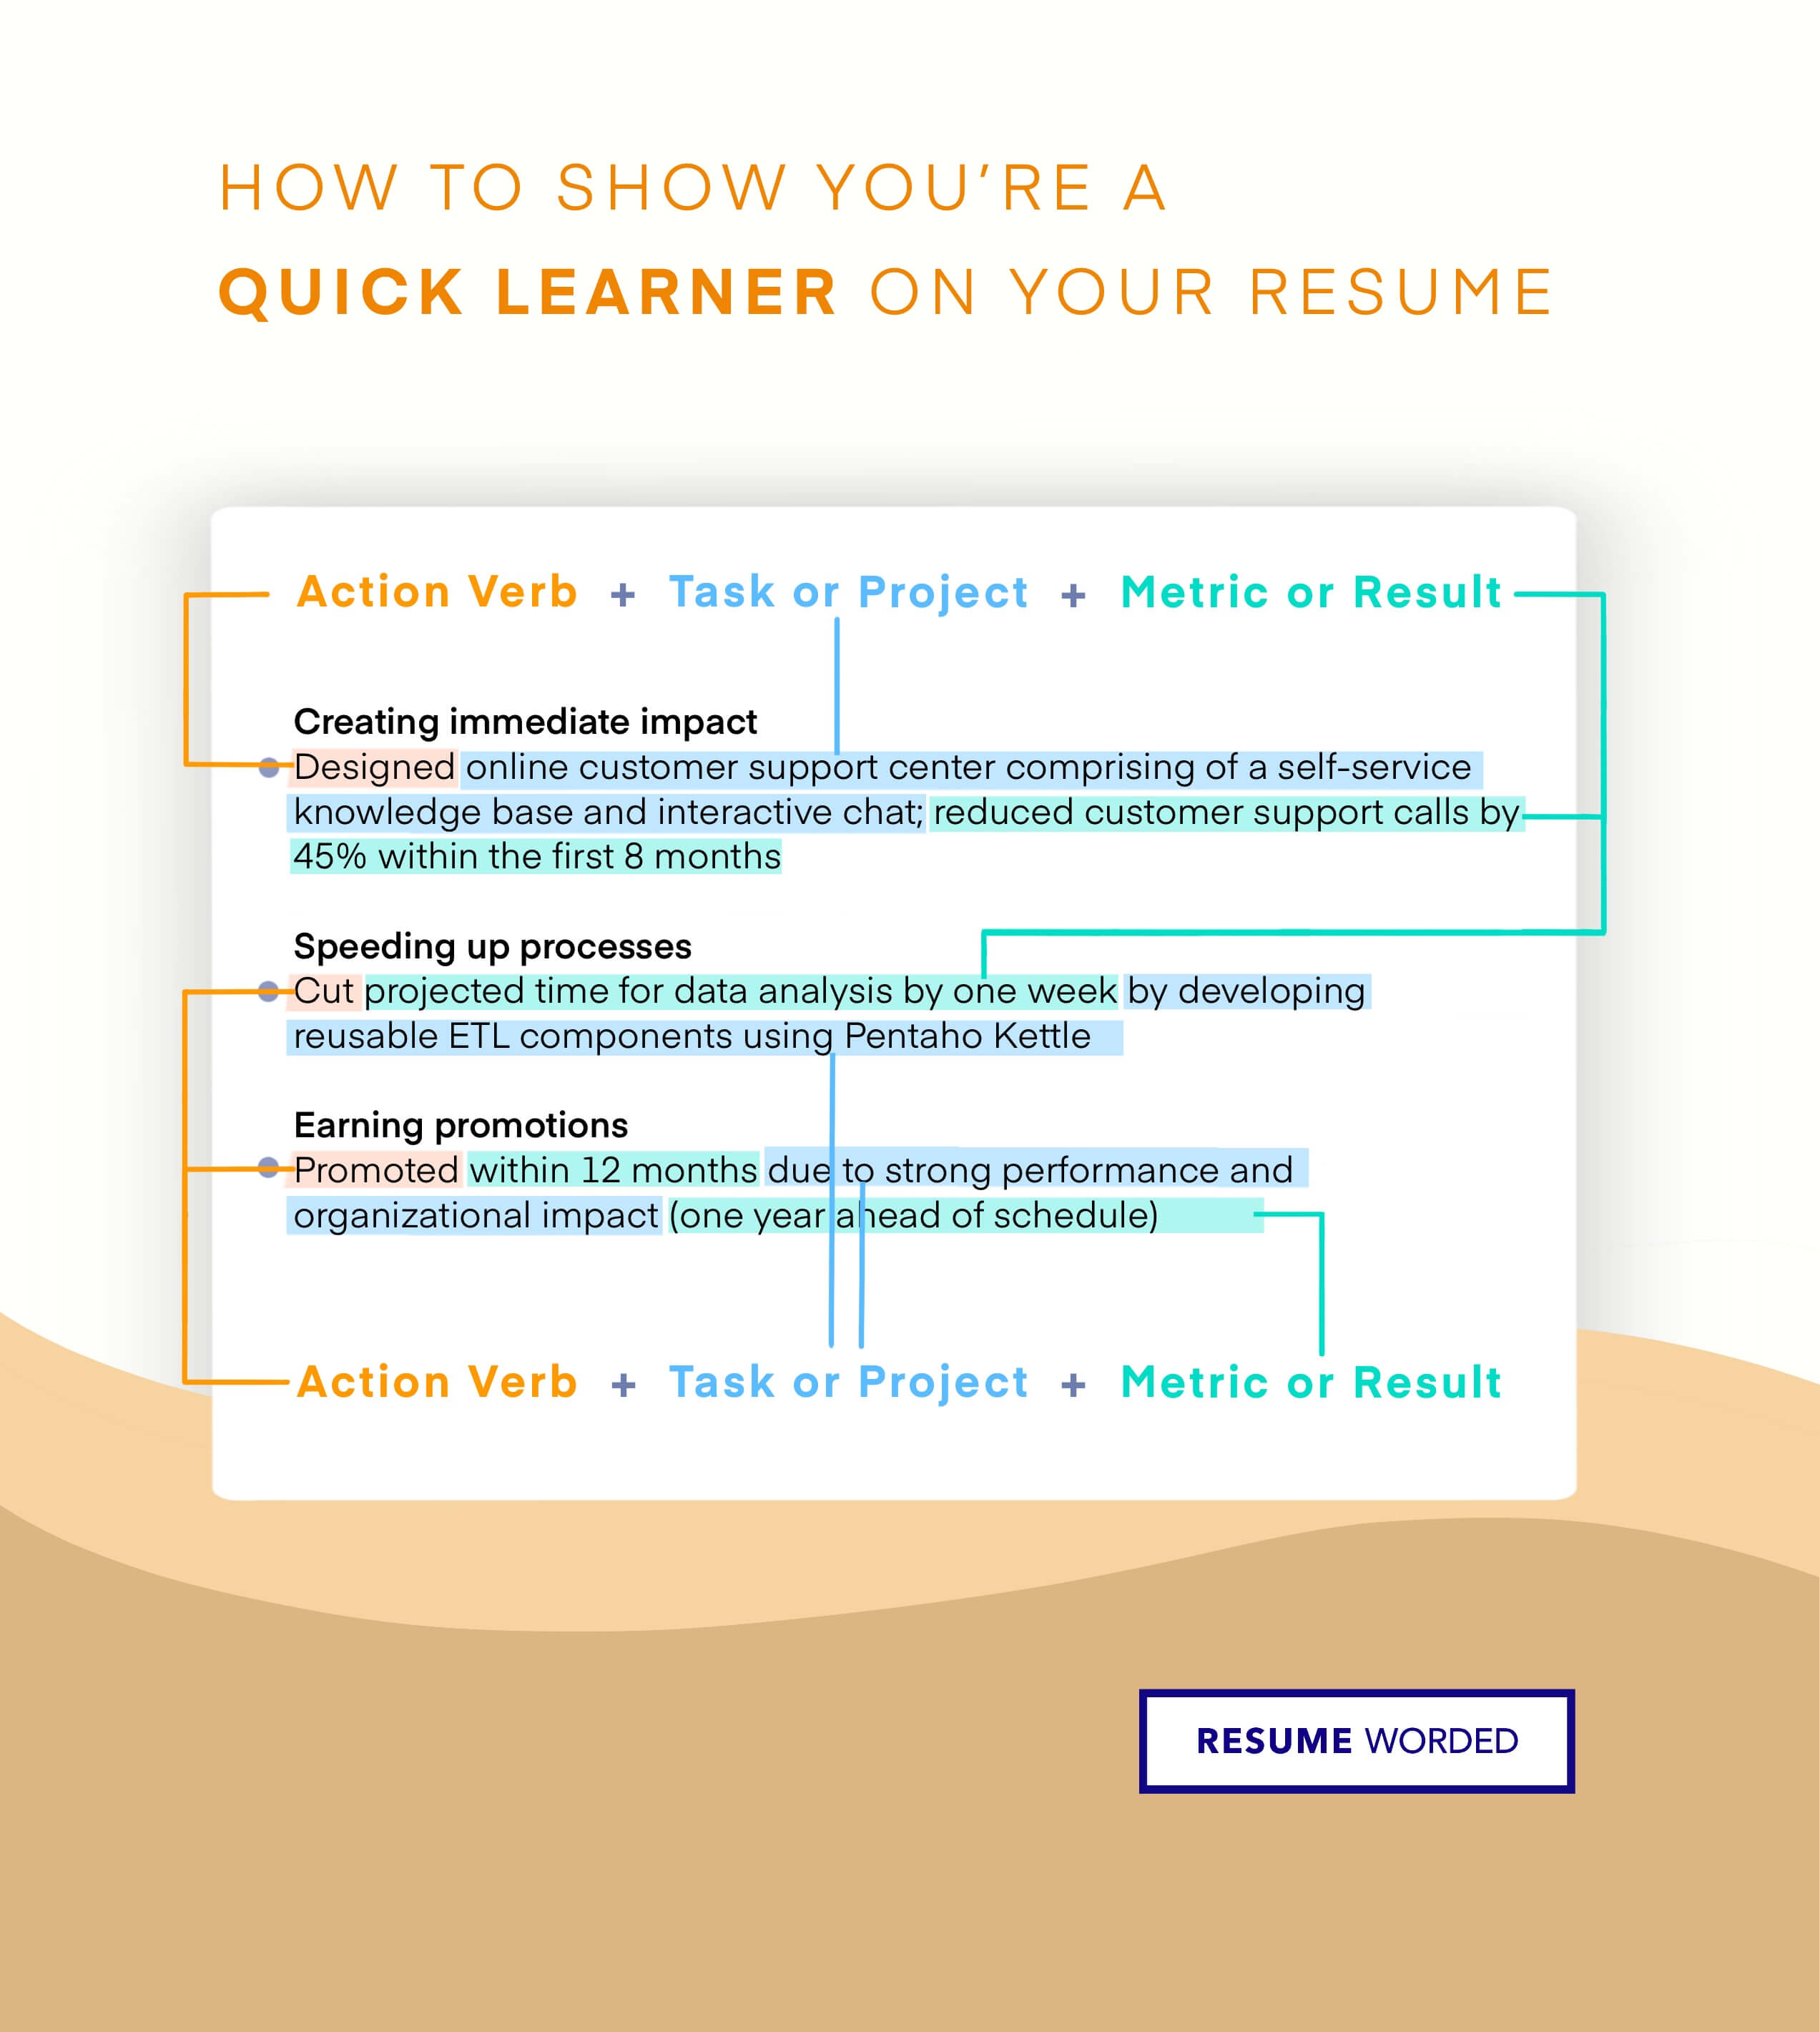 resume words for quick learner